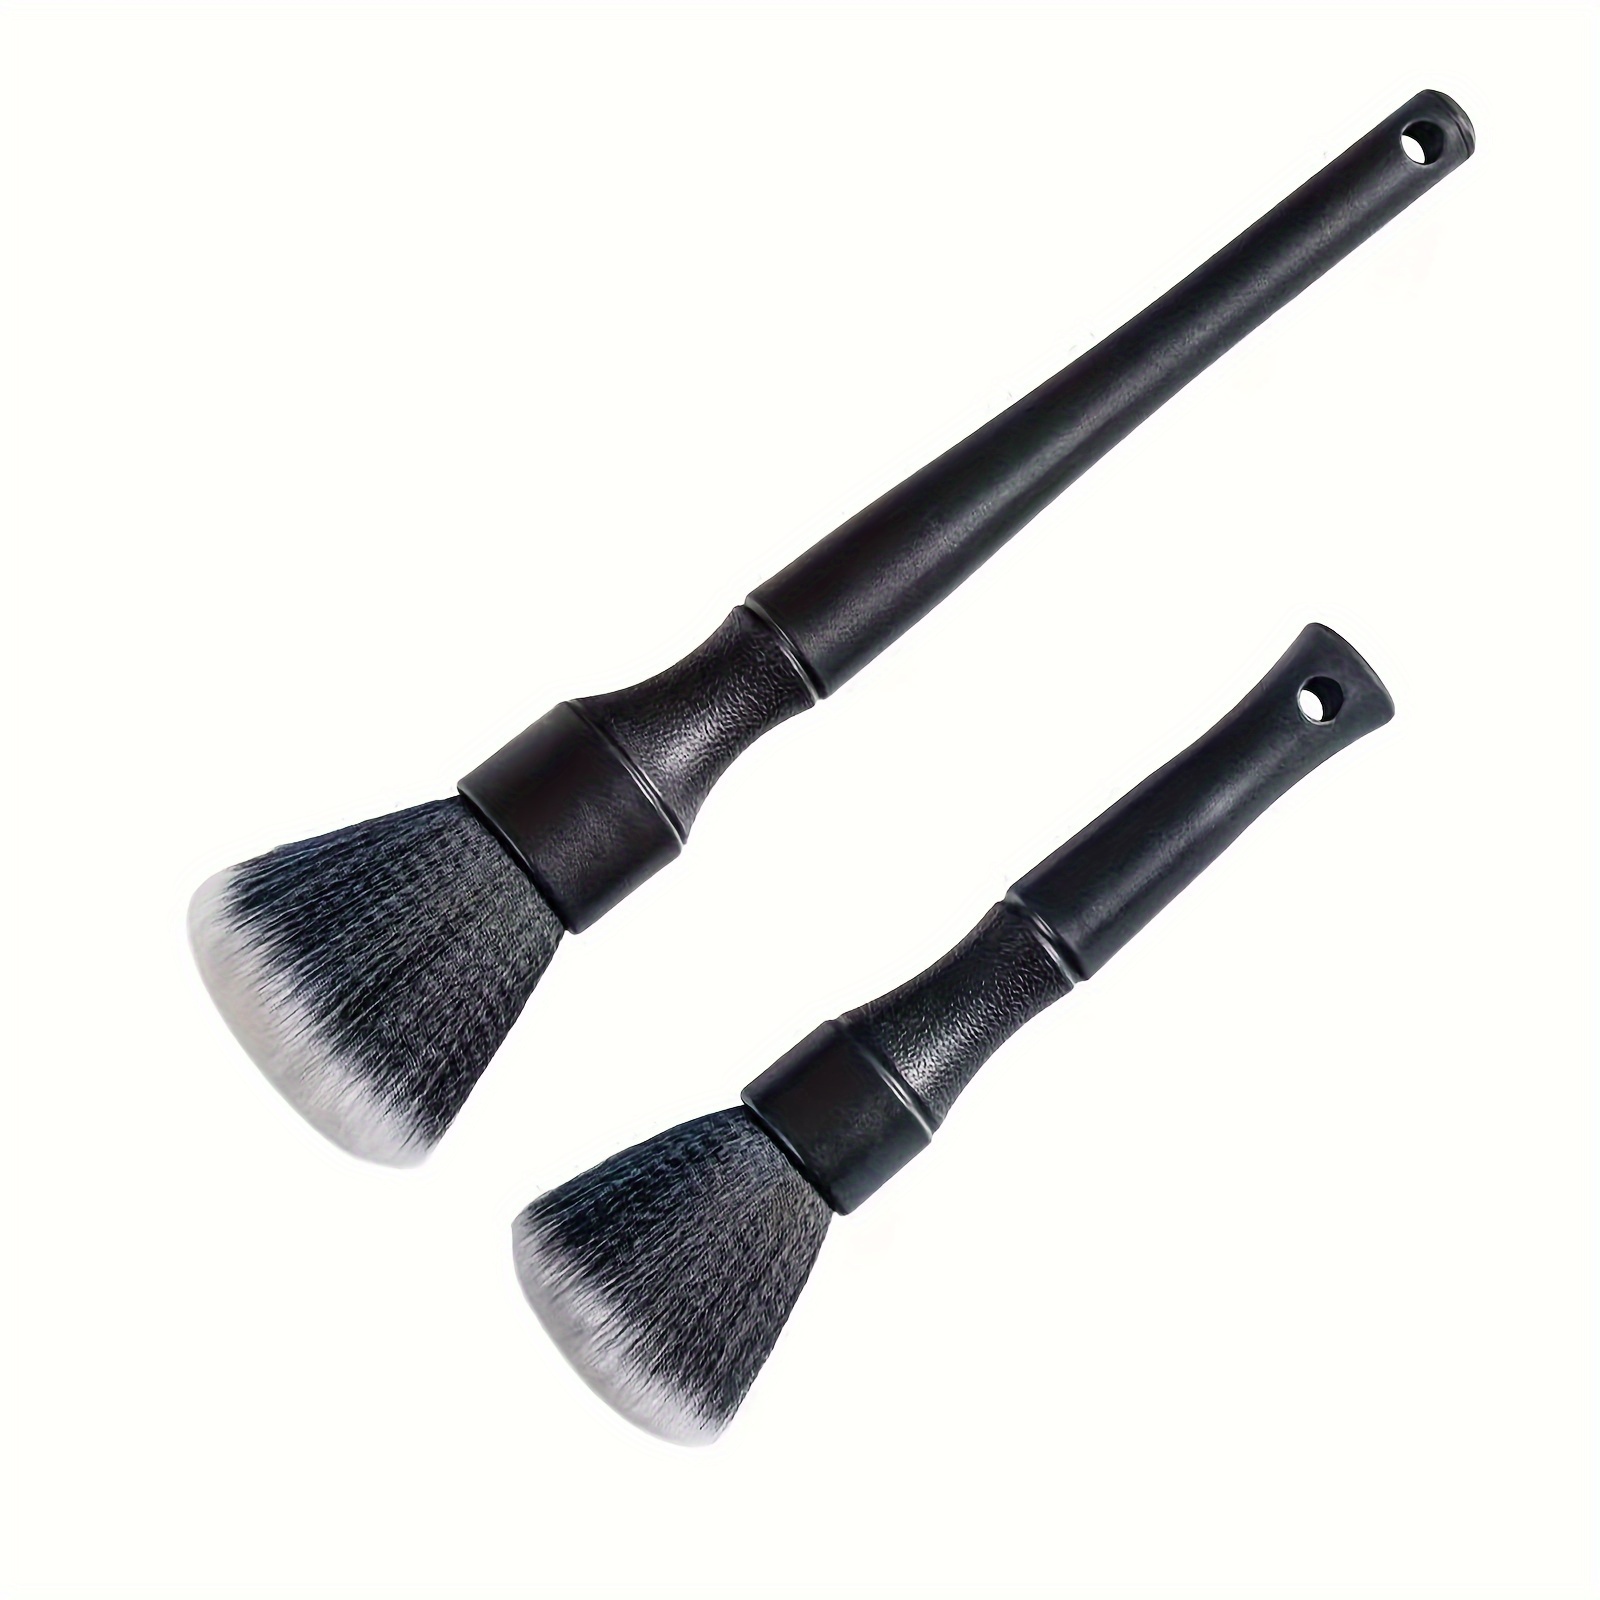  Auto Interior Dust Brush,Soft Bristles Detailing Brush Dusting  Tool Car Cleaning Brush Curved Design Dirt Dust Clean Brushes for  Automotive Dashboard,Air Conditioner Vents,Leather,Computer,Makeup :  Automotive